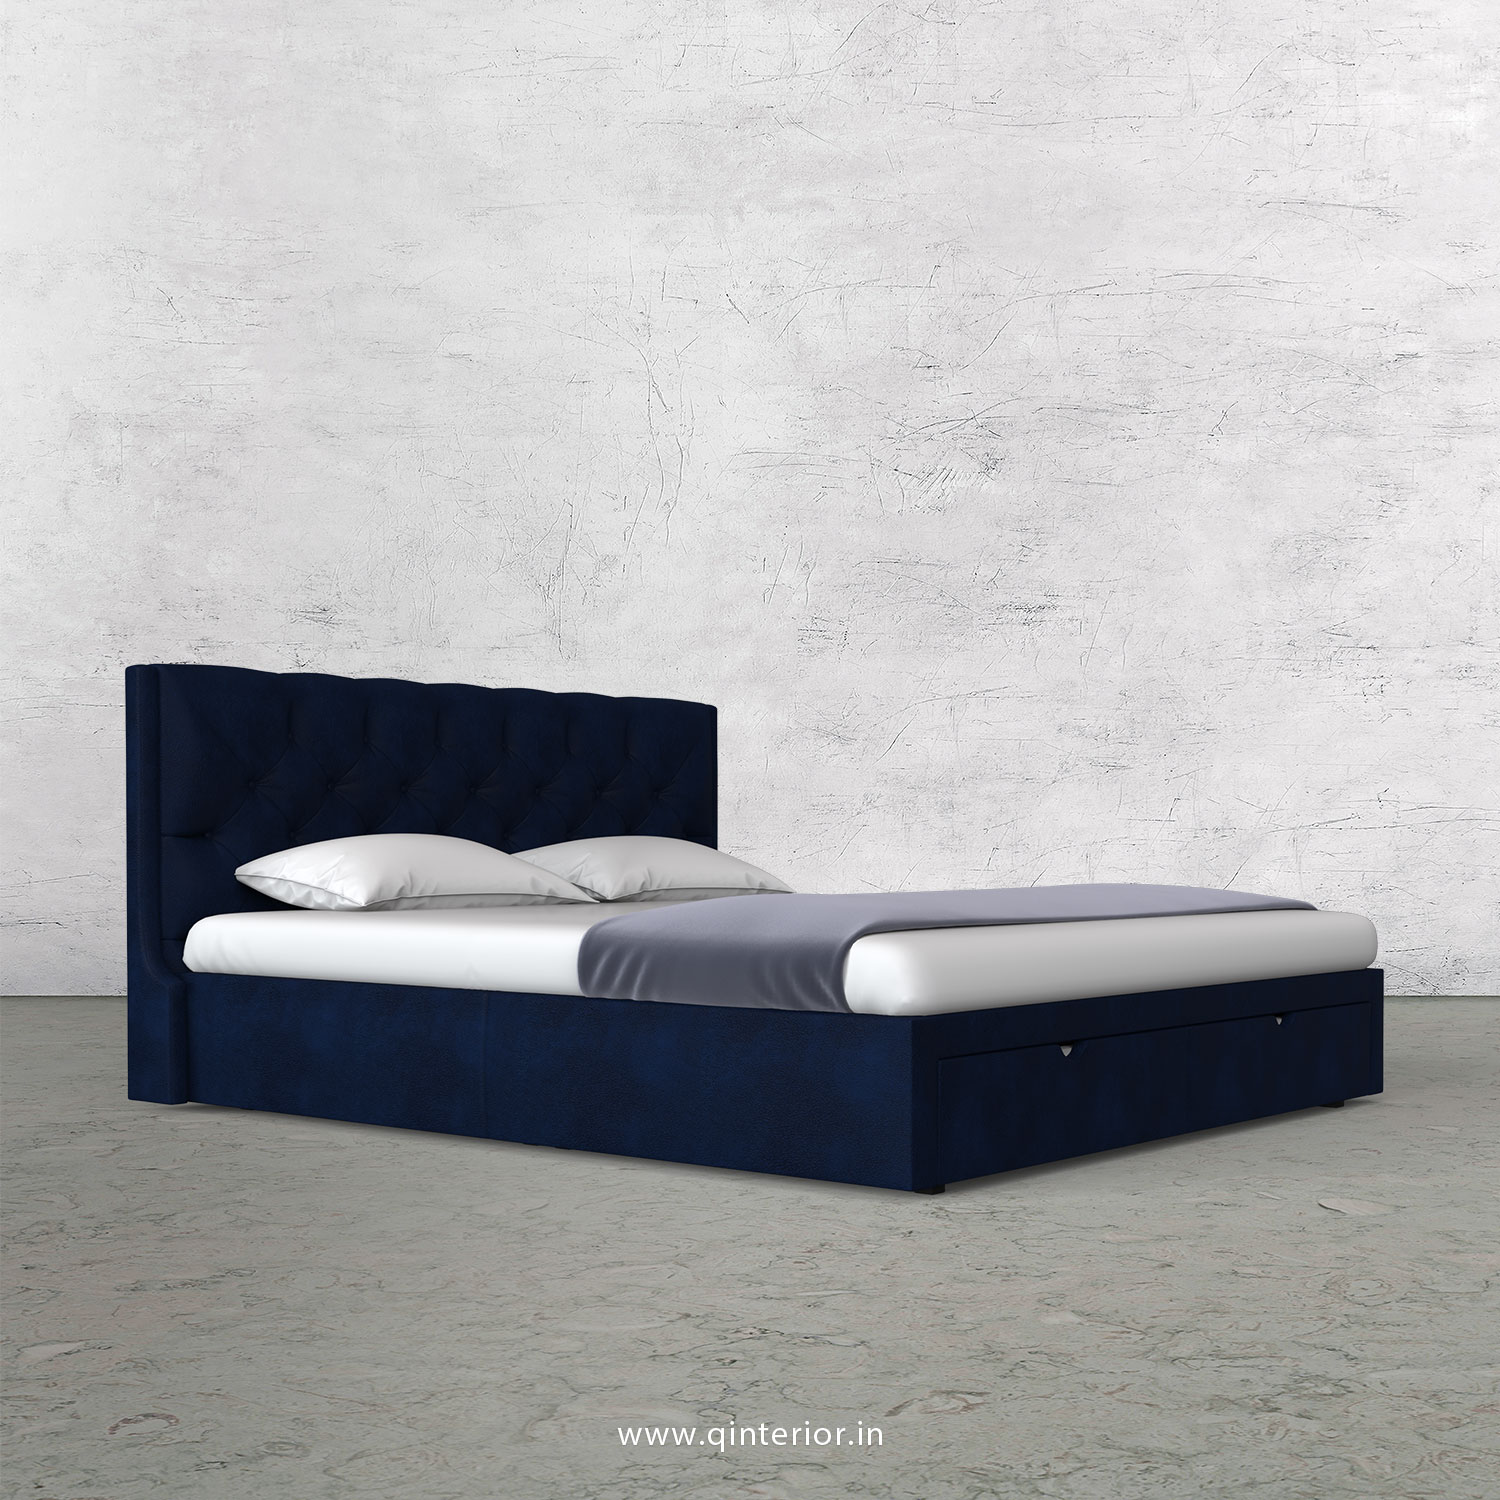 Scorpius Queen Storage Bed in Fab Leather Fabric - QBD001 FL13